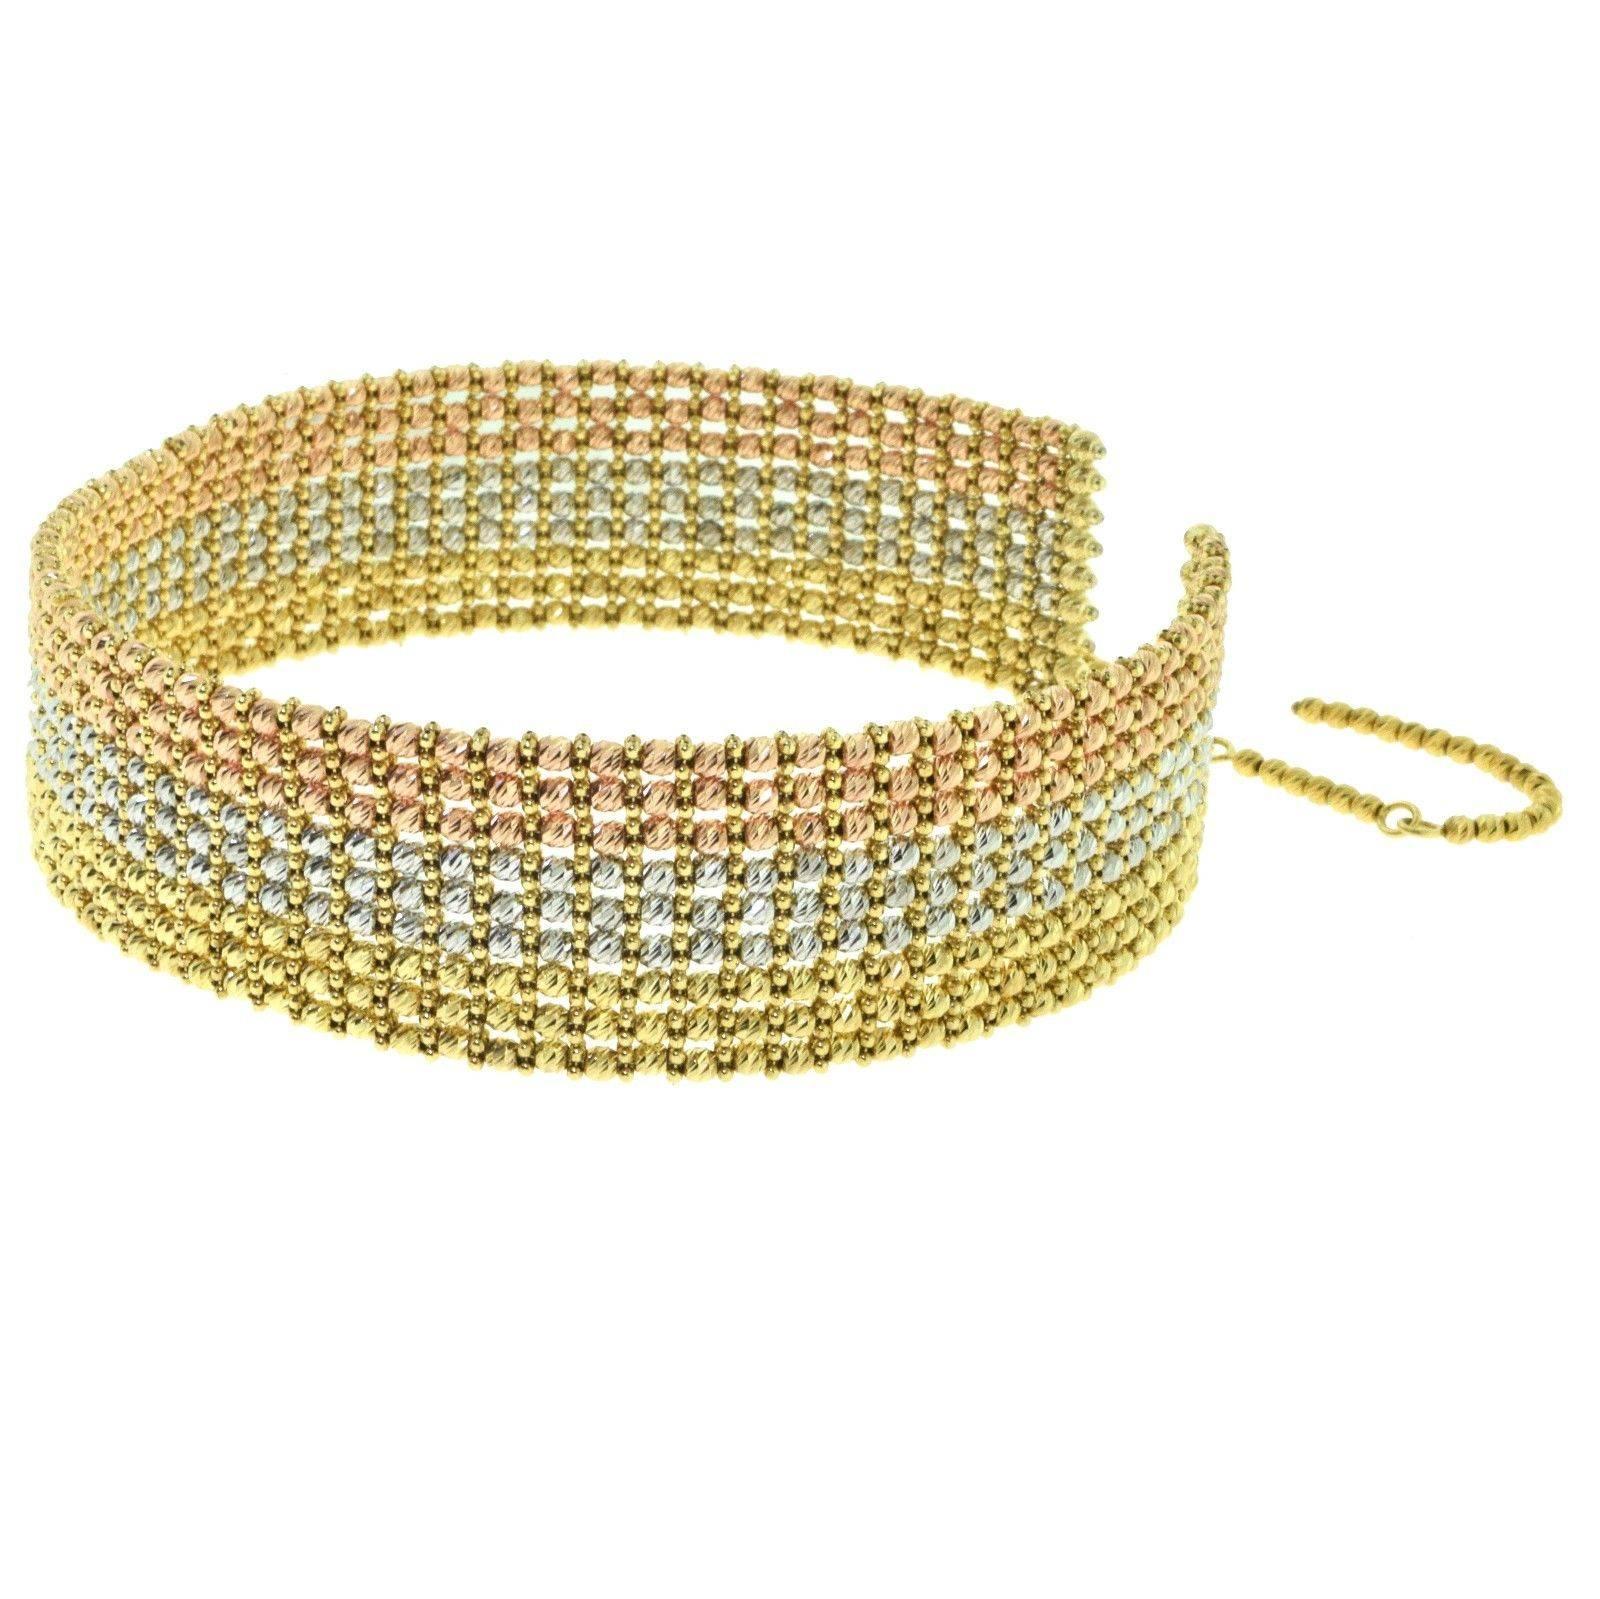 Metal: Yellow Gold, White Gold, Rose Gold
Metal Purity: 14k
Total Item Weight (g): 65
Choker Length: approx. 10 